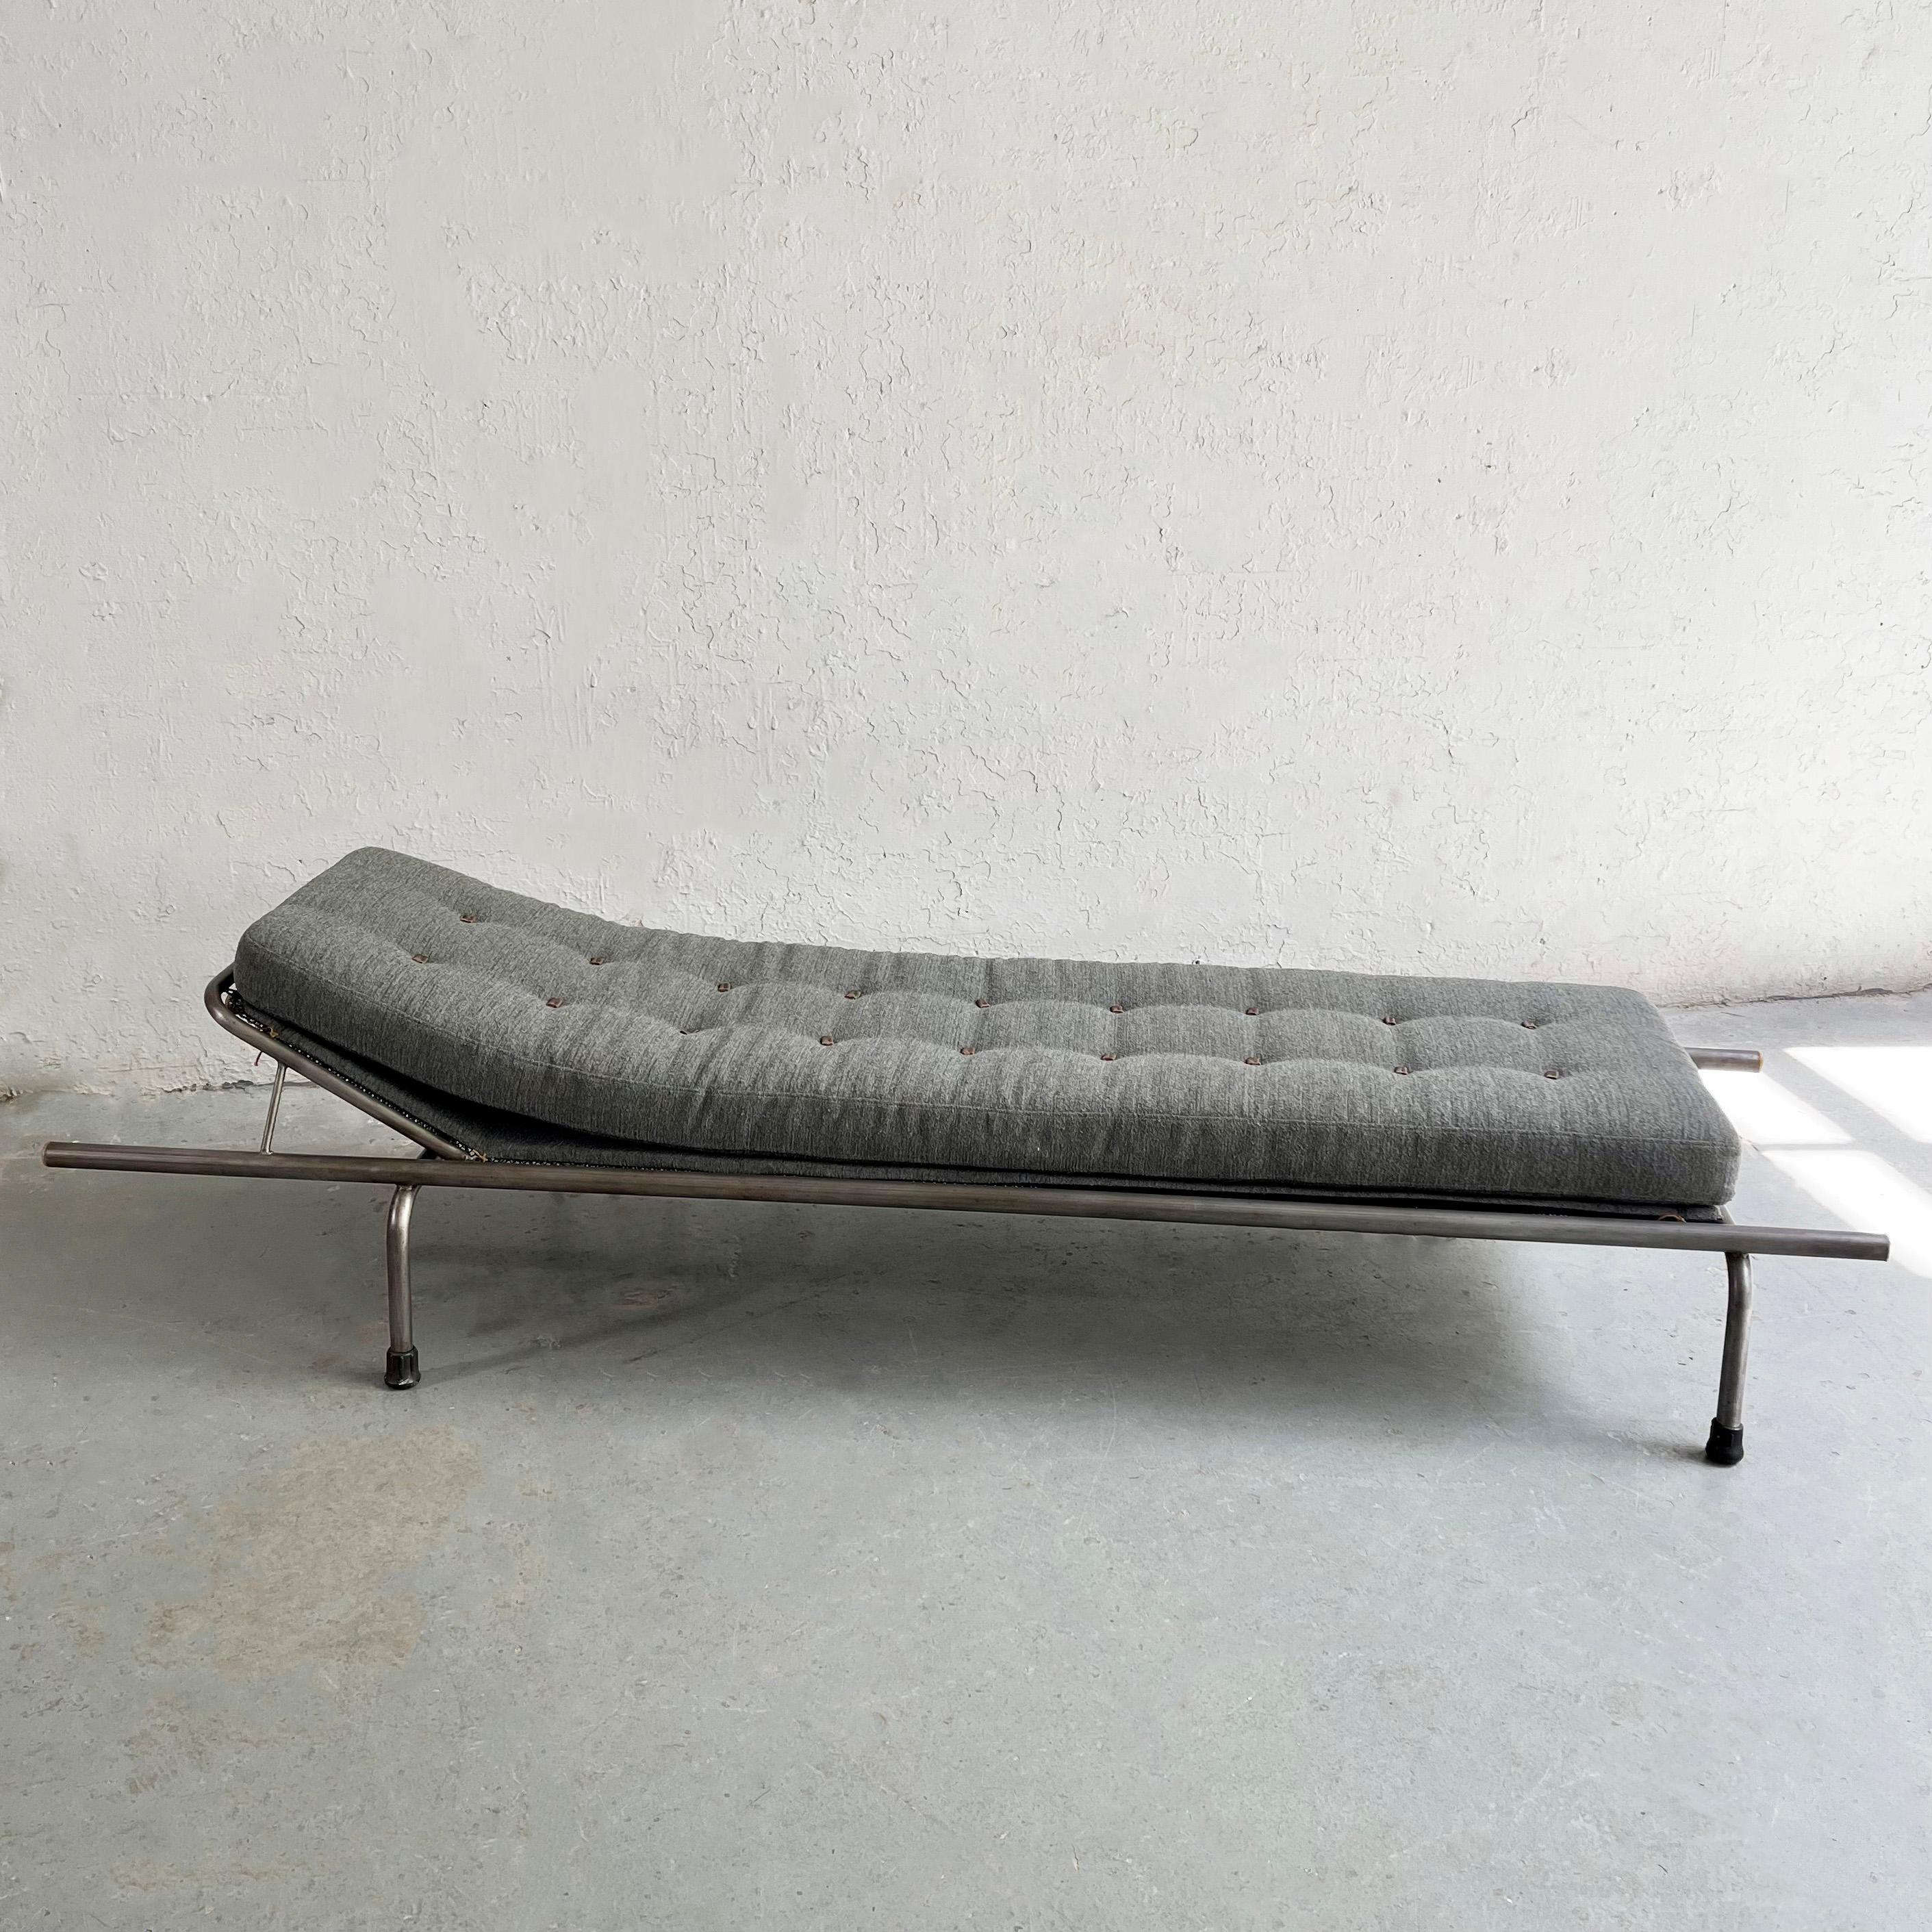 Industrial, tubular steel frame, chaise longue with segemented chenille cushion with custom leather tie buttons resting on an upholstered chenille backing and mesh frame.